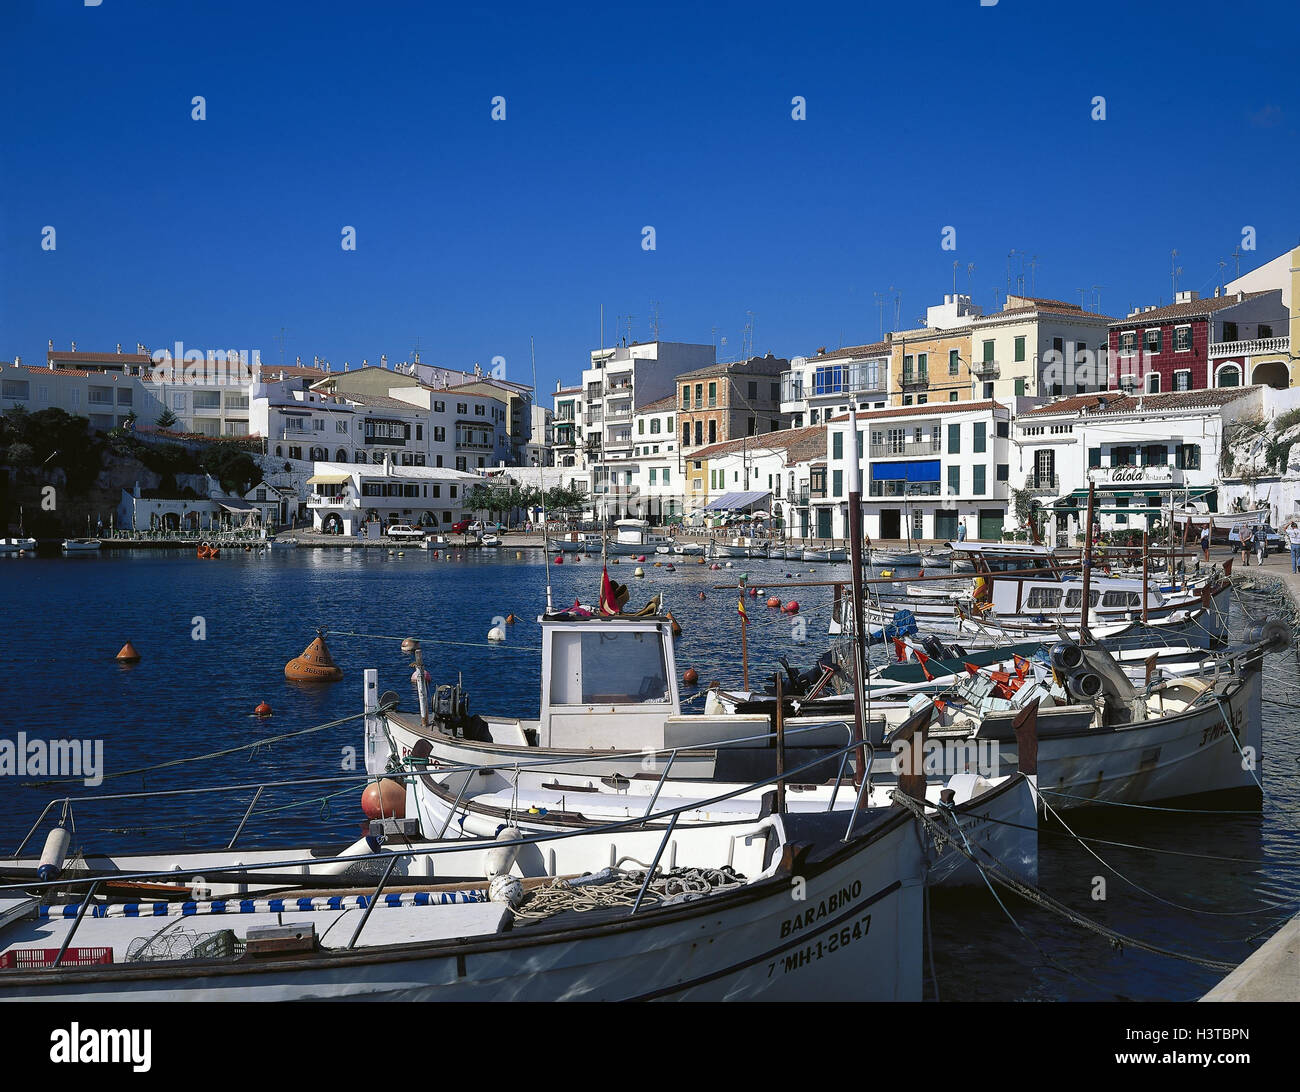 Spain, the Balearic Islands island, Menorca, It Castell, Cales Fonts, harbour, local view AUTHOR'S NAMING OBLIGATORILY, the Balearic Islands, island, the Mediterranean Sea, sea, place, harbour bay, ships, boots, residential houses, promenade Stock Photo